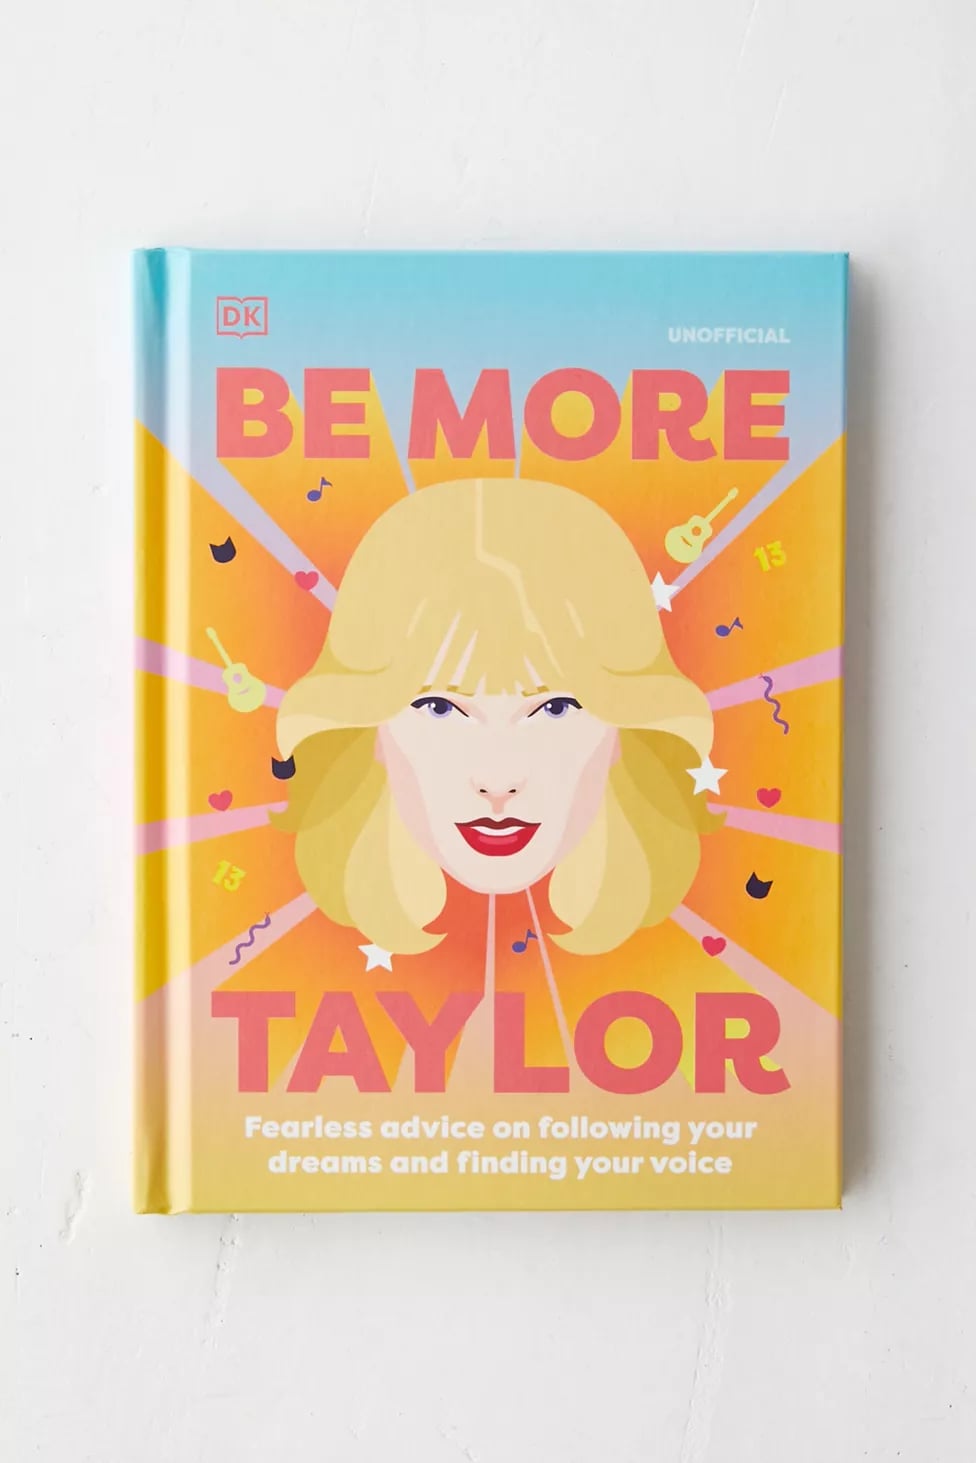 13 gorgeous gifts for Taylor Swift fans